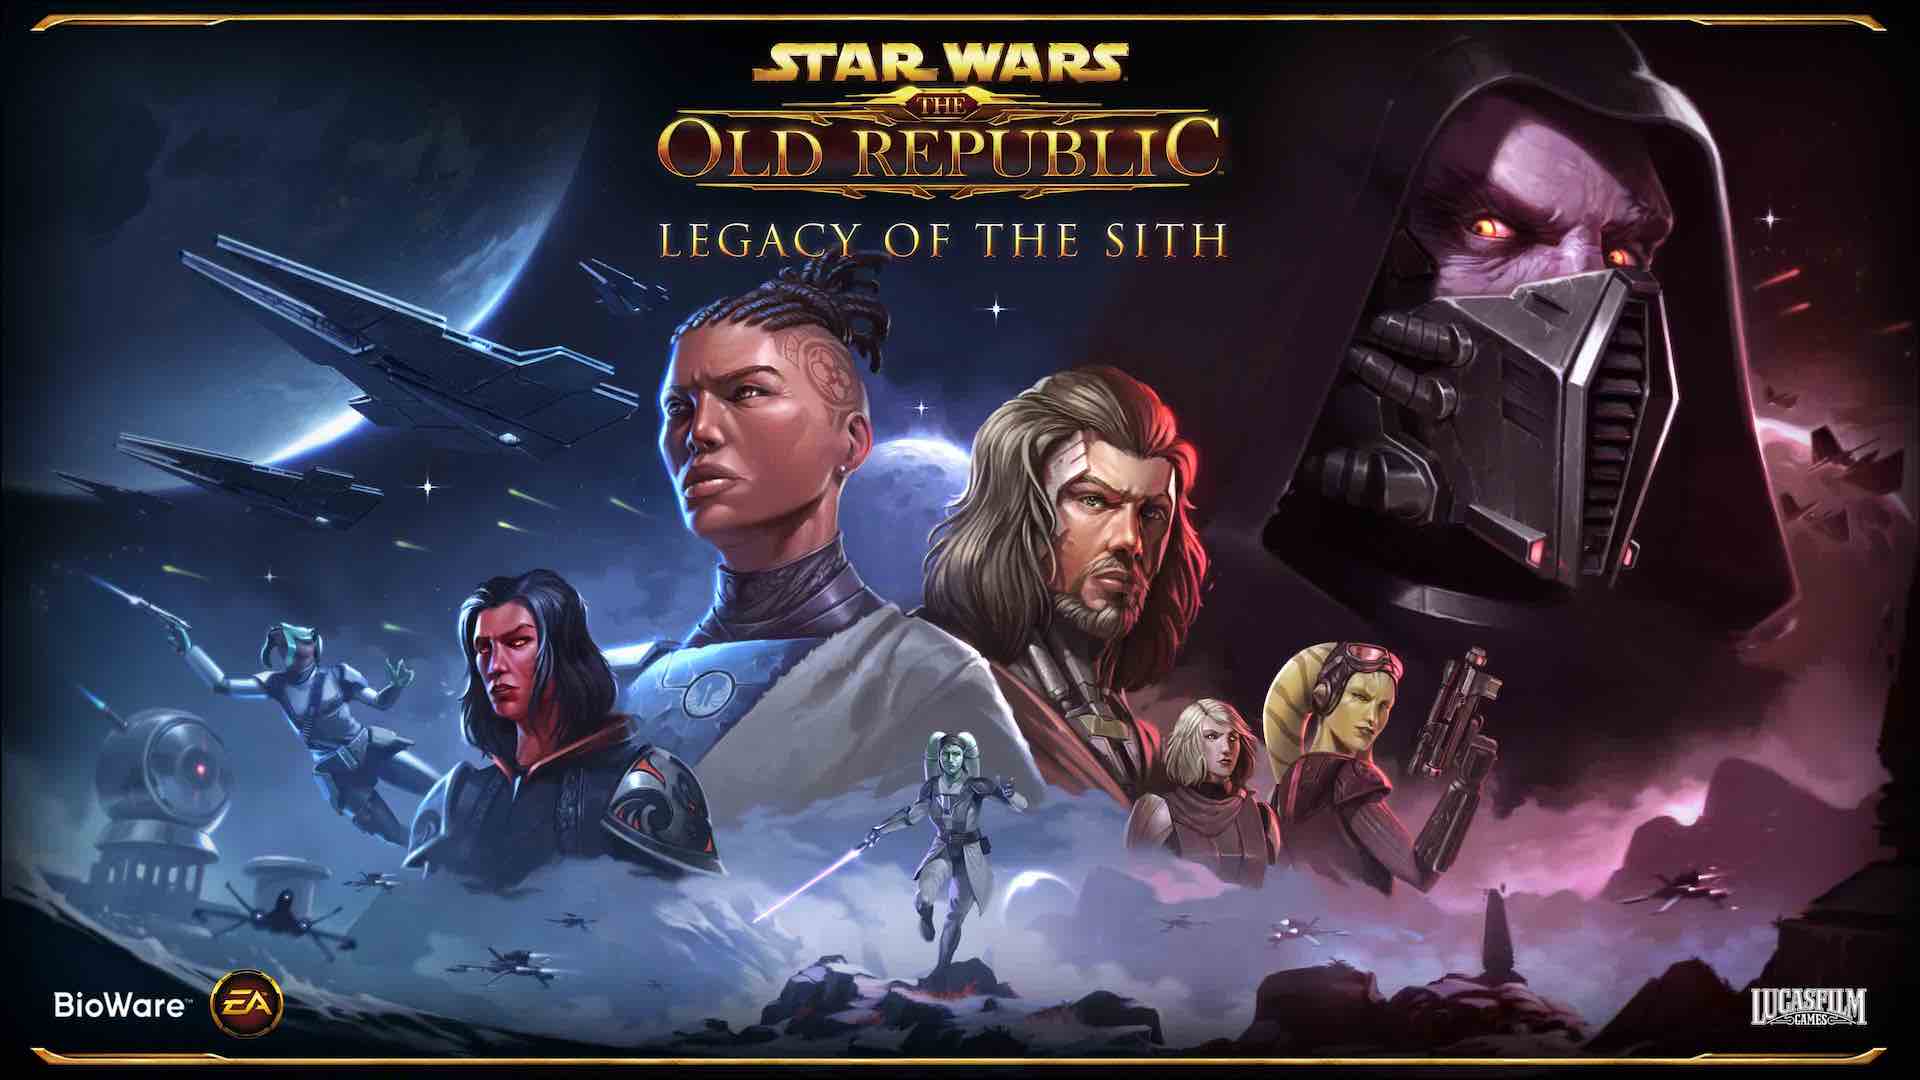 Star Wars - The Old Republic - Legacy of the Sith